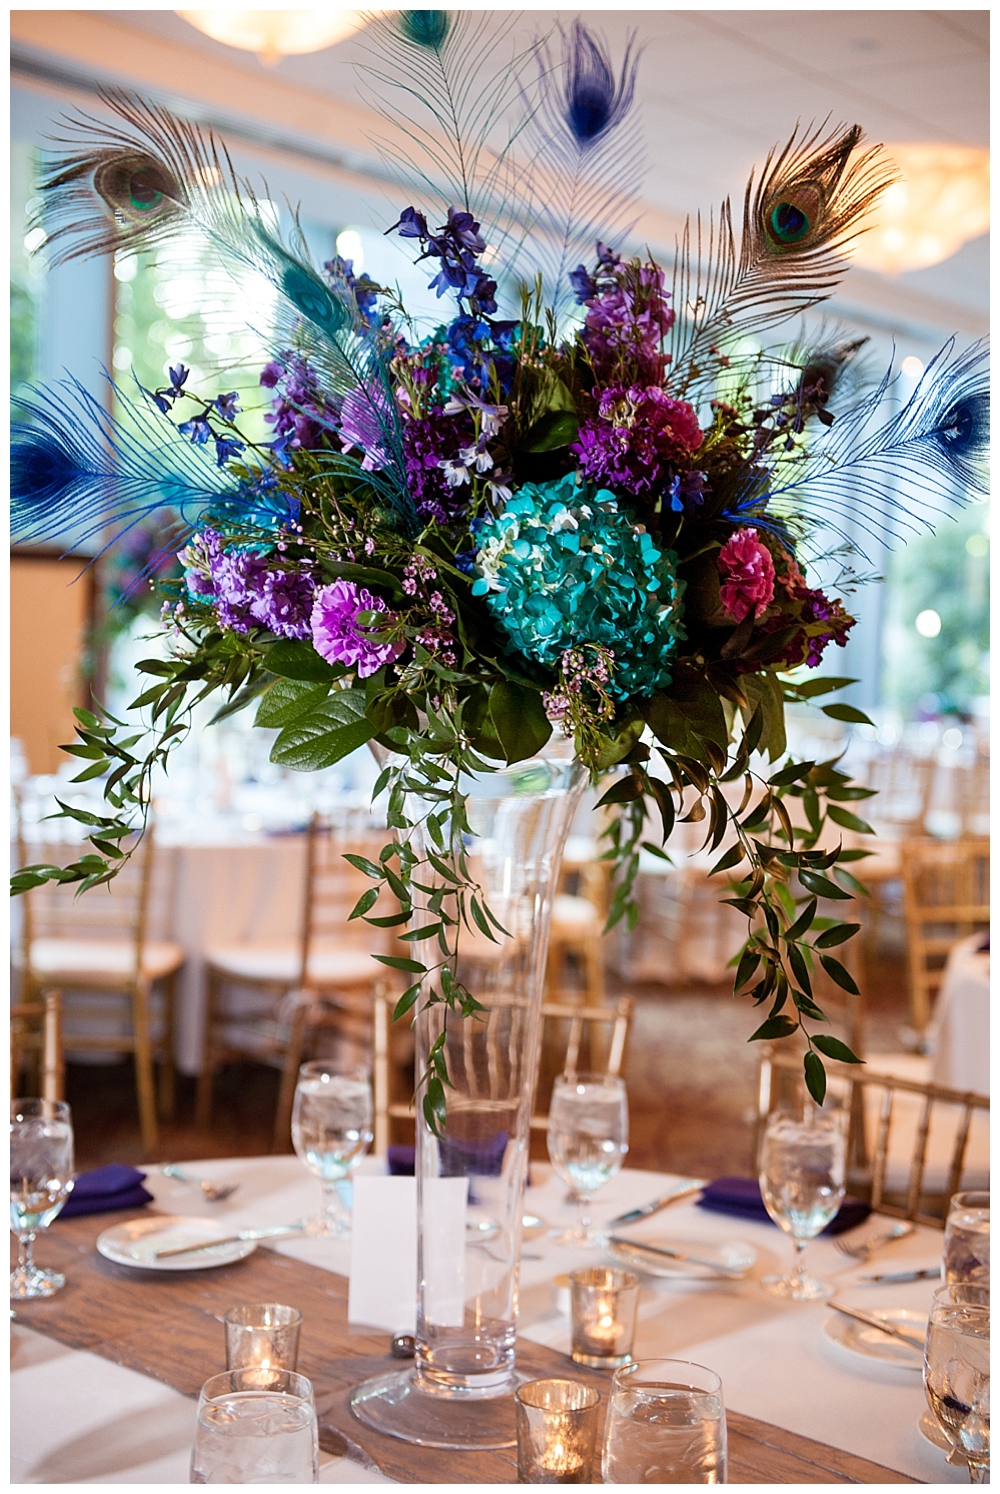 wedding reception tables with blue and purple centerpieces